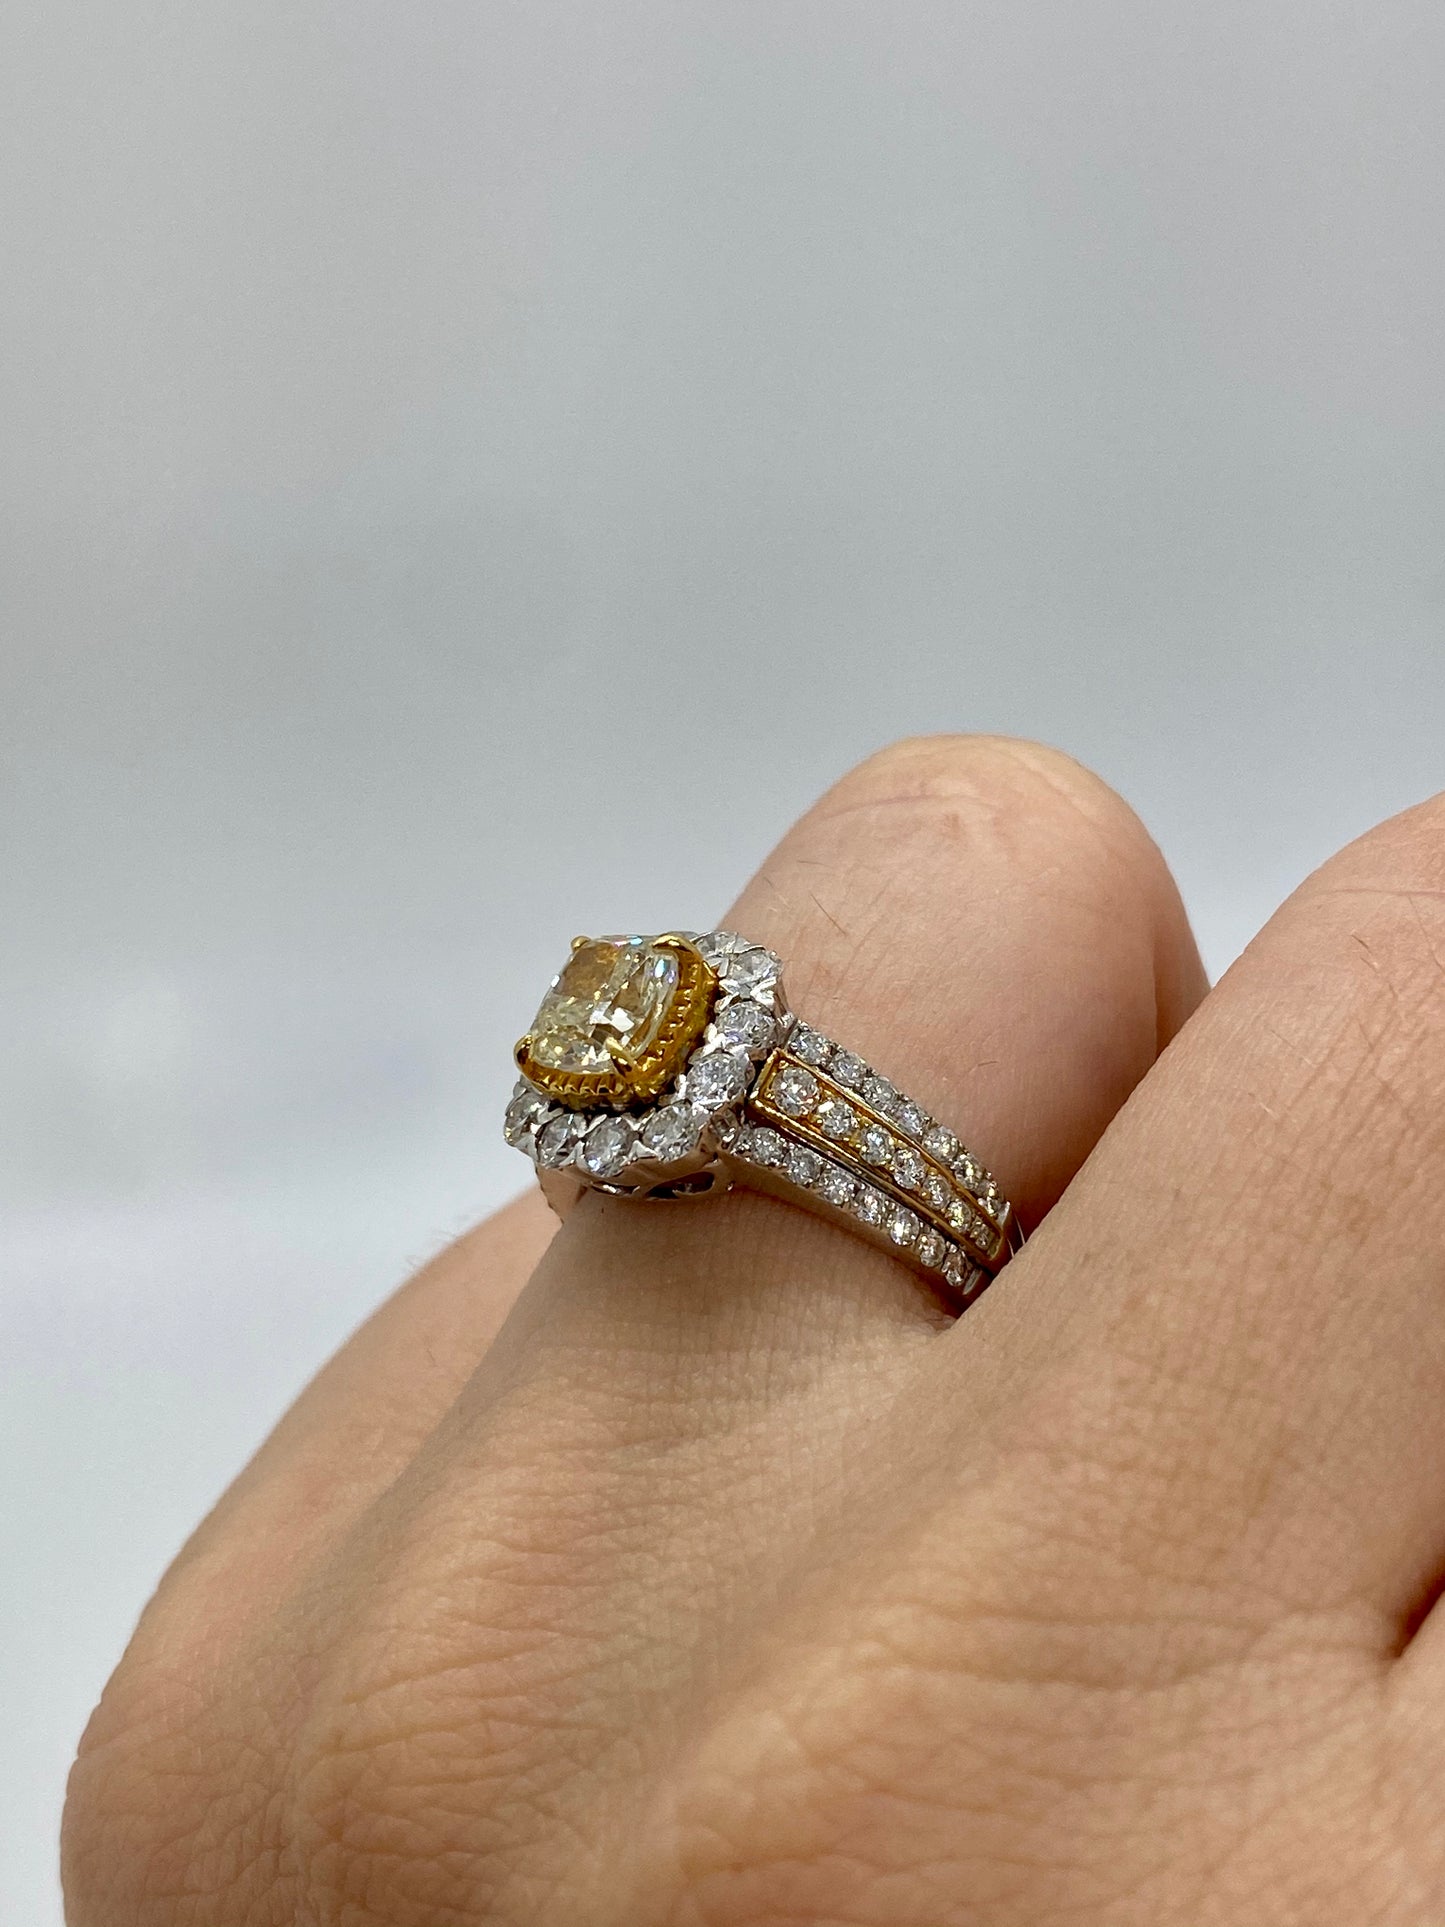 Yellow Diamond Ring R20018 - Royal Gems and Jewelry